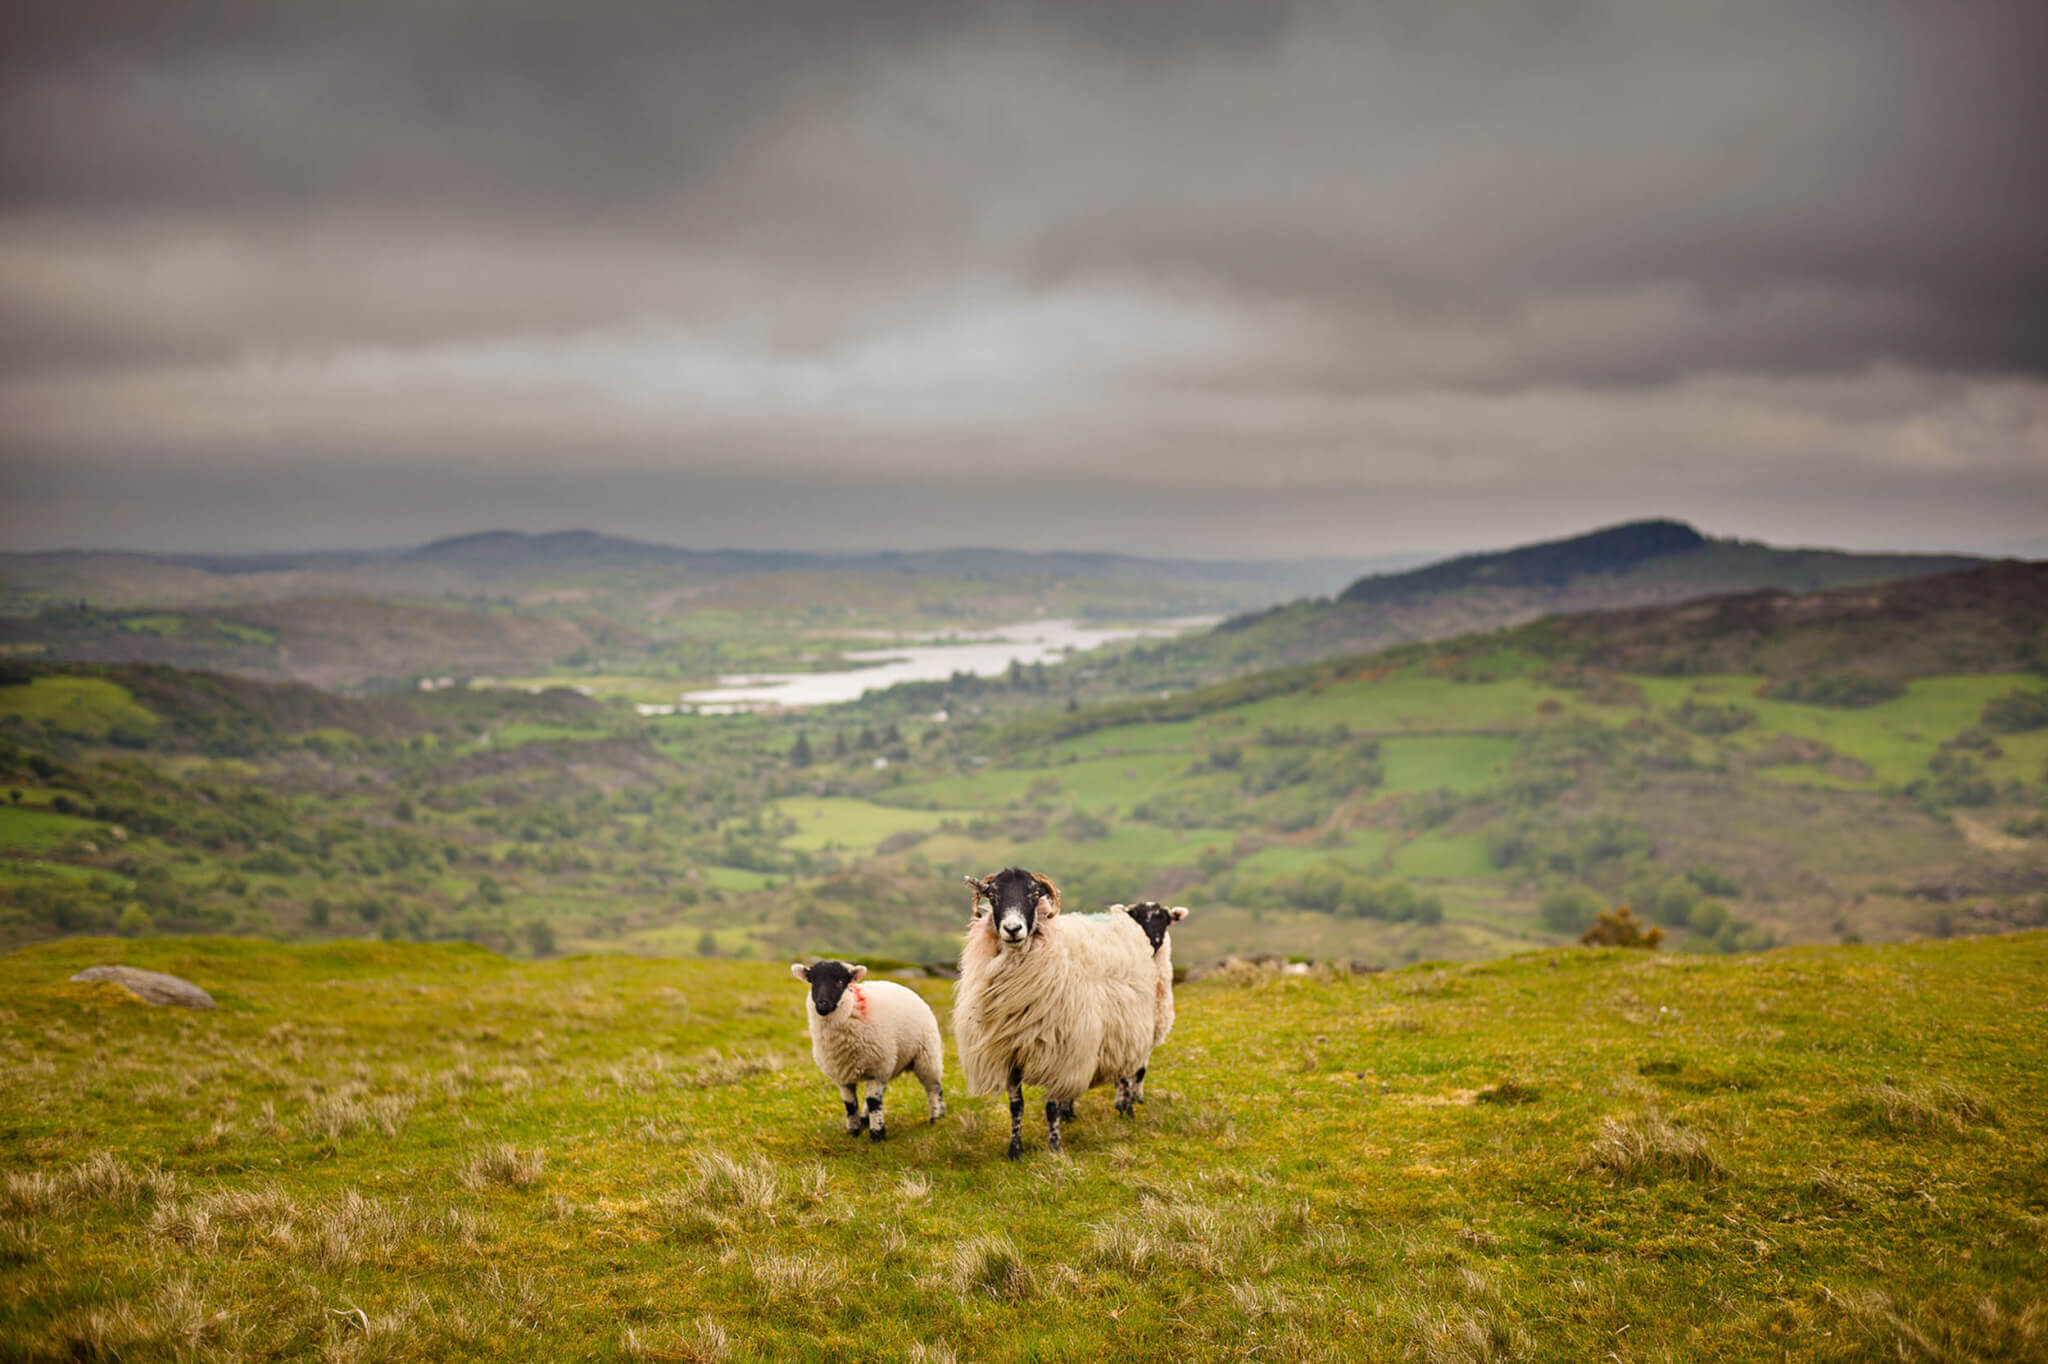 Sheep on mountain in Ireland during storm.